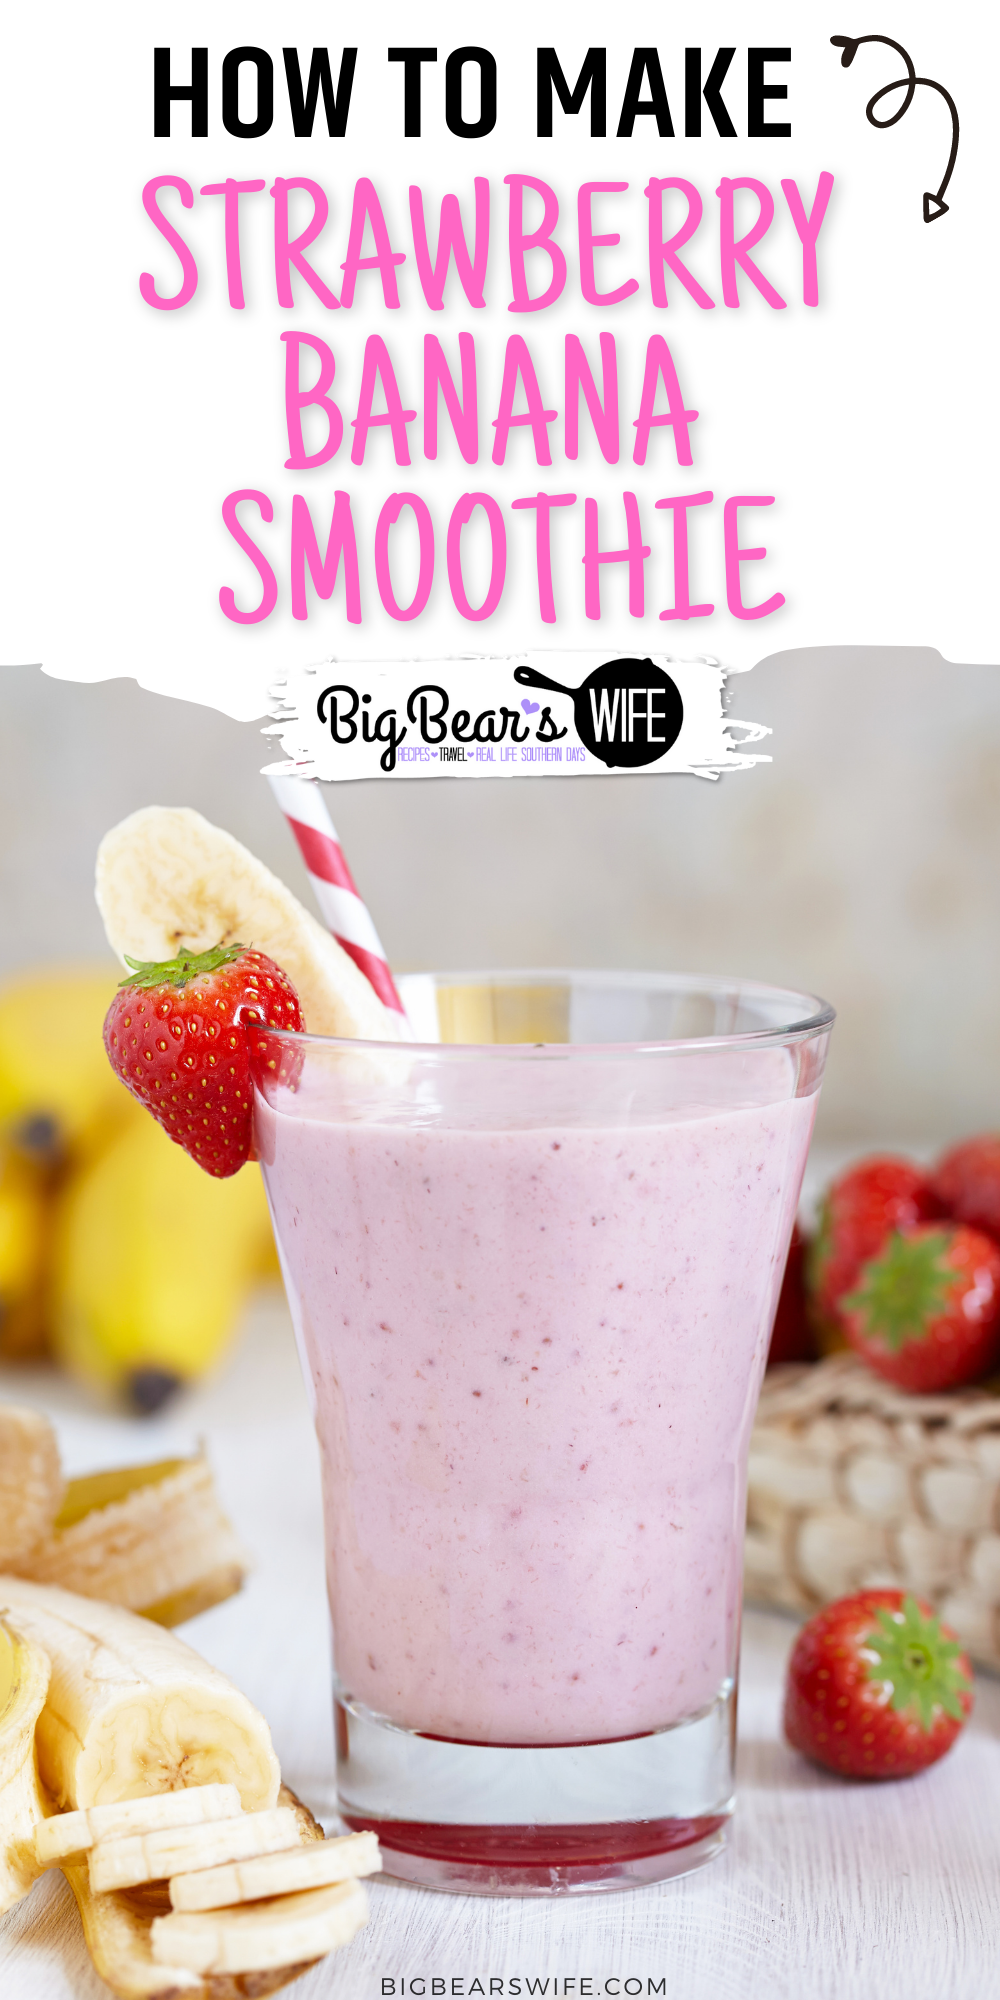 This 4 ingredient Strawberry Banana Smoothie is so easy to make and it makes for the perfect breakfast or afternoon treat!  via @bigbearswife